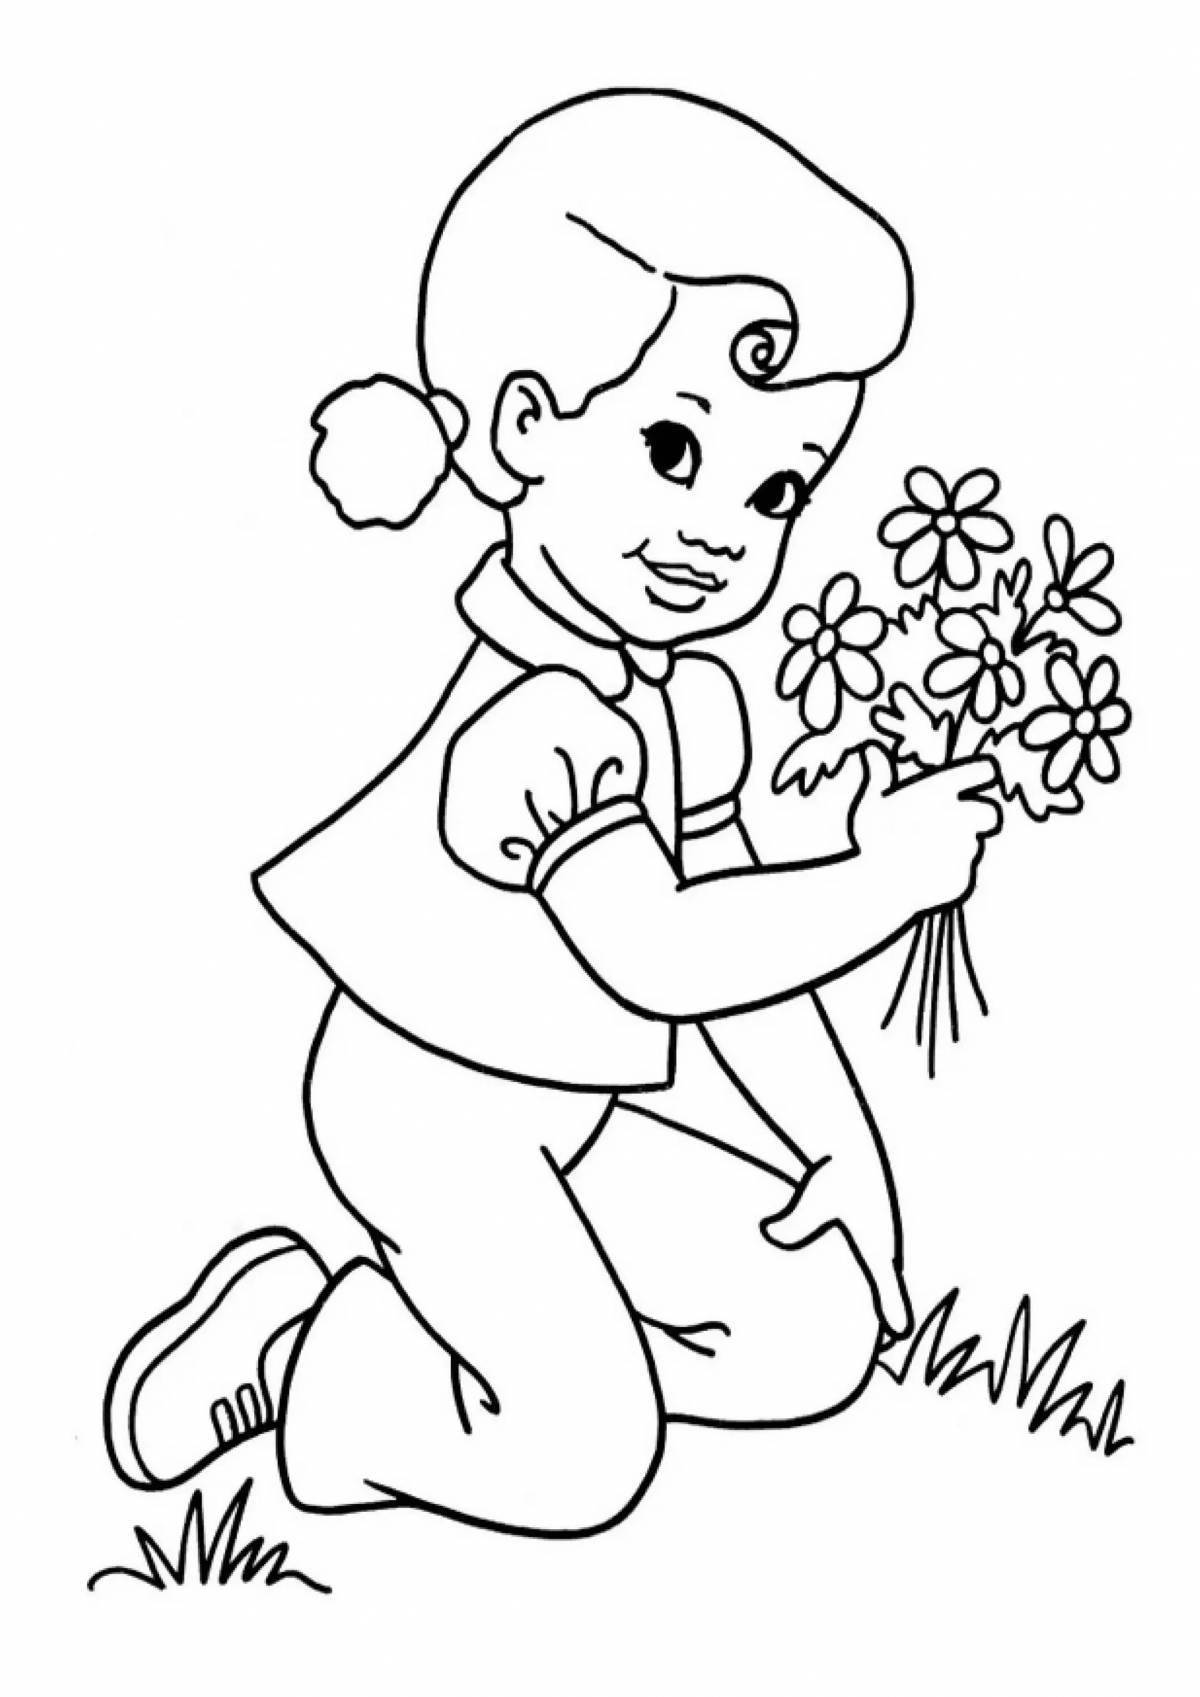 Color-transfixed coloring page kids